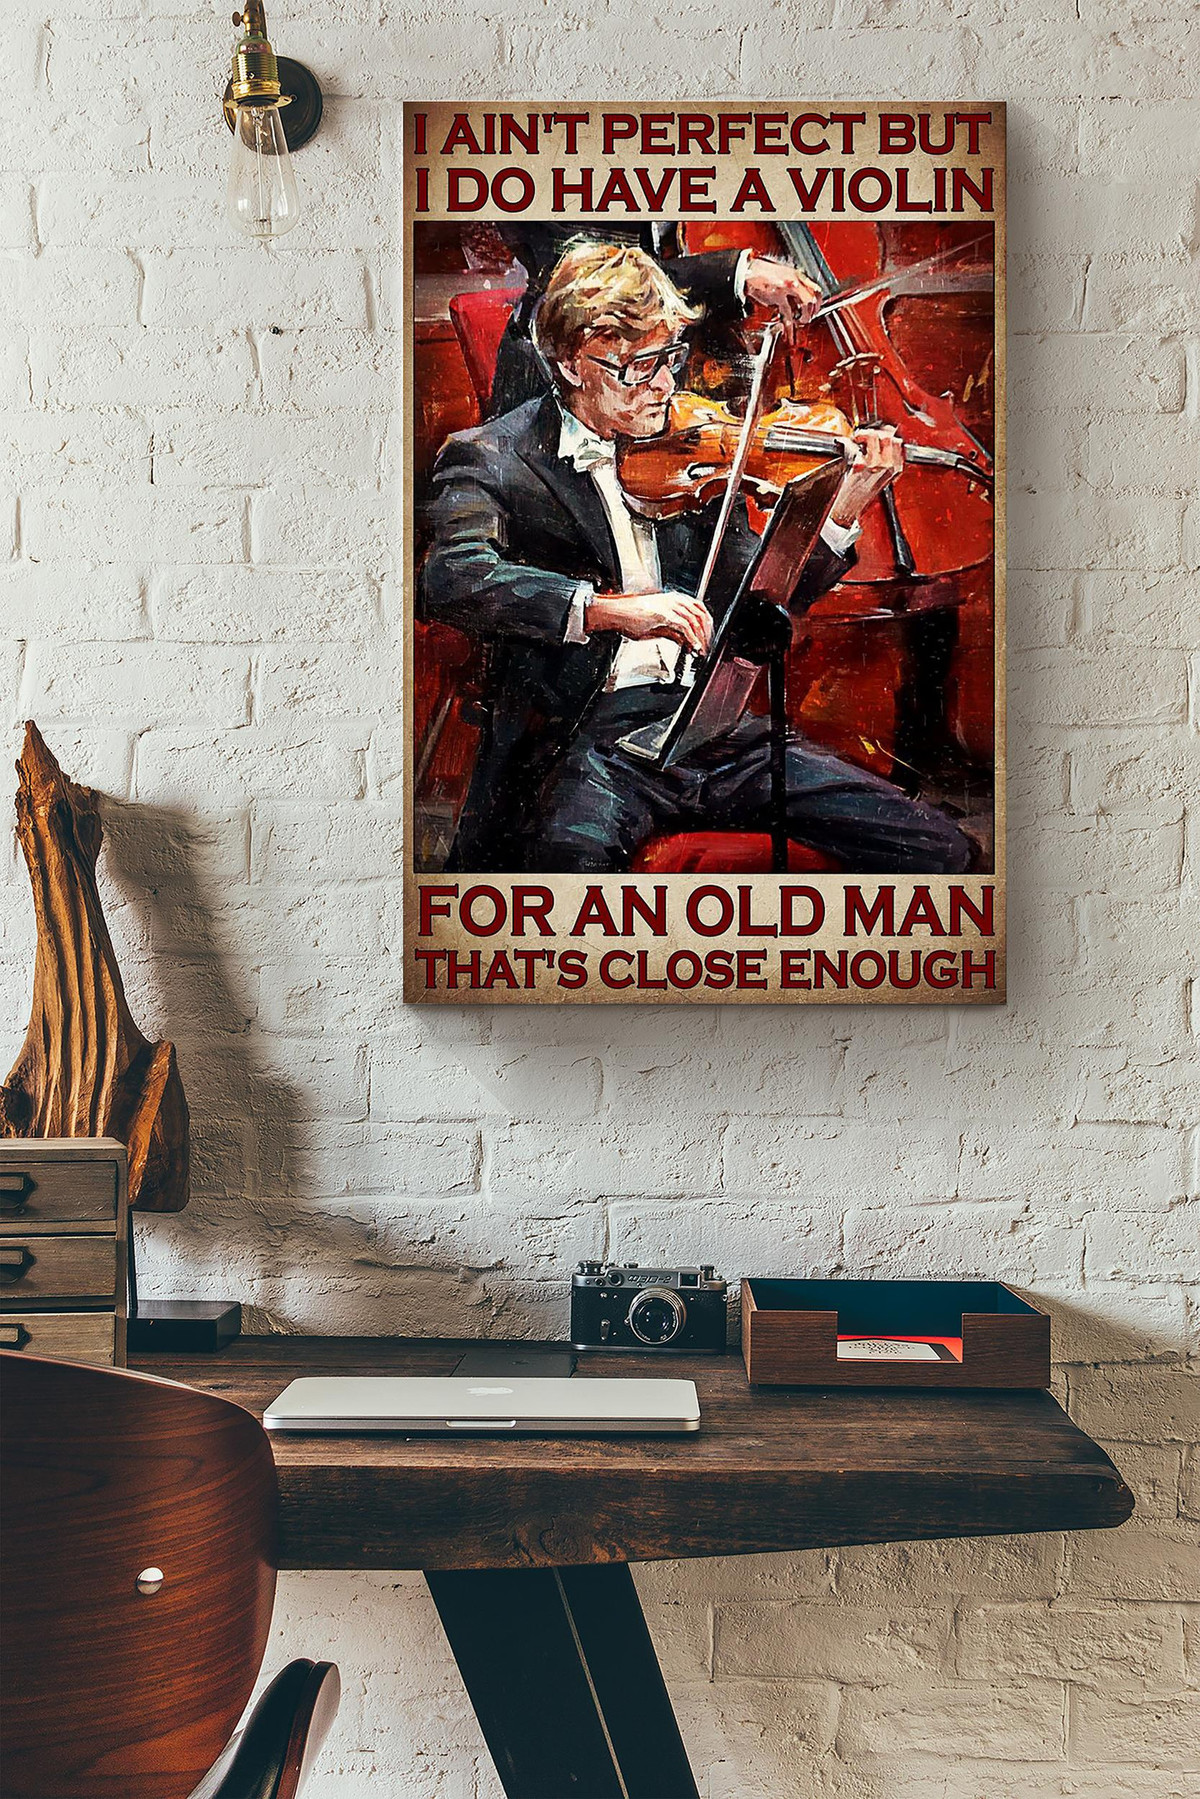 I Aint Perfect But I Do Have A Violin For An Old Man Thats Close Enough Canvas Painting Ideas, Canvas Hanging Prints, Gift Idea Framed Prints, Canvas Paintings Wrapped Canvas 8x10